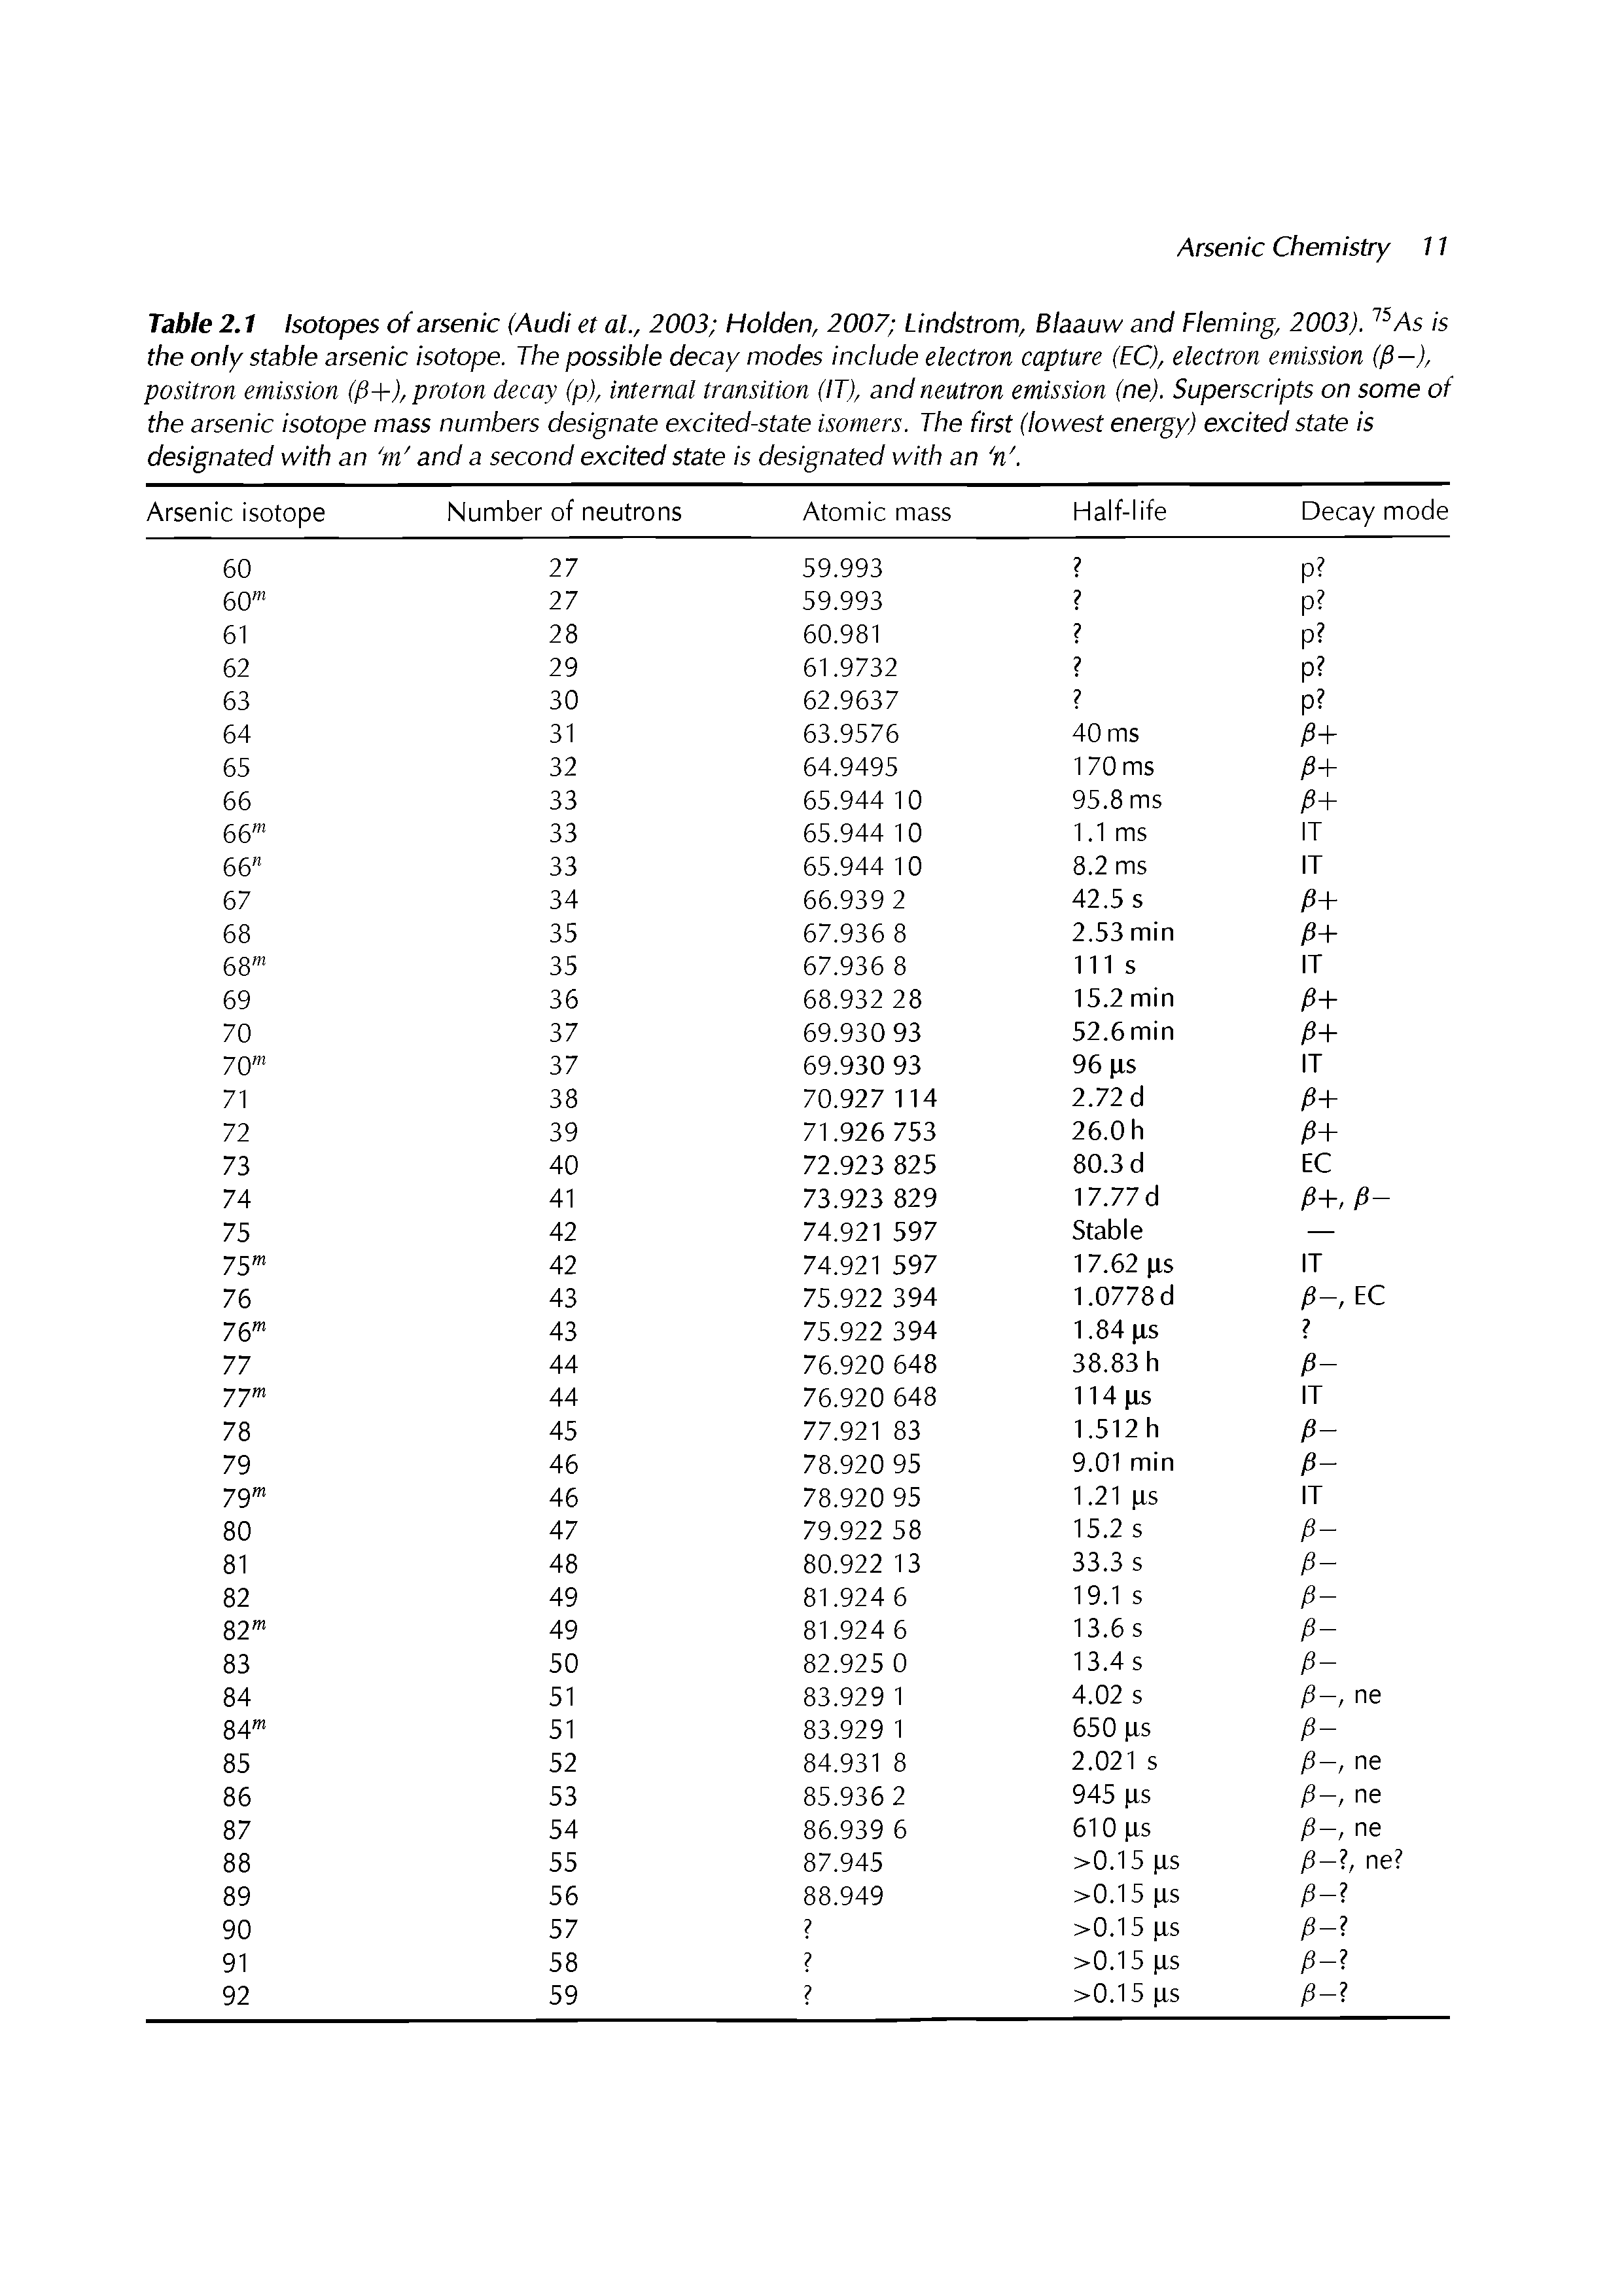 Table 2.1 Isotopes of arsenic (Audi et al., 2003 Holden, 2007 Lindstrom, Blaauw and Fleming, 2003).15As is the only stable arsenic isotope. The possible decay modes include electron capture (EC), electron emission (P ), positron emission (P+), proton decay (p), internal transition (IT), and neutron emission (ne). Superscripts on some of the arsenic isotope mass numbers designate excited-state isomers. The first (lowest energy) excited state is designated with an m and a second excited state is designated with an n. ...